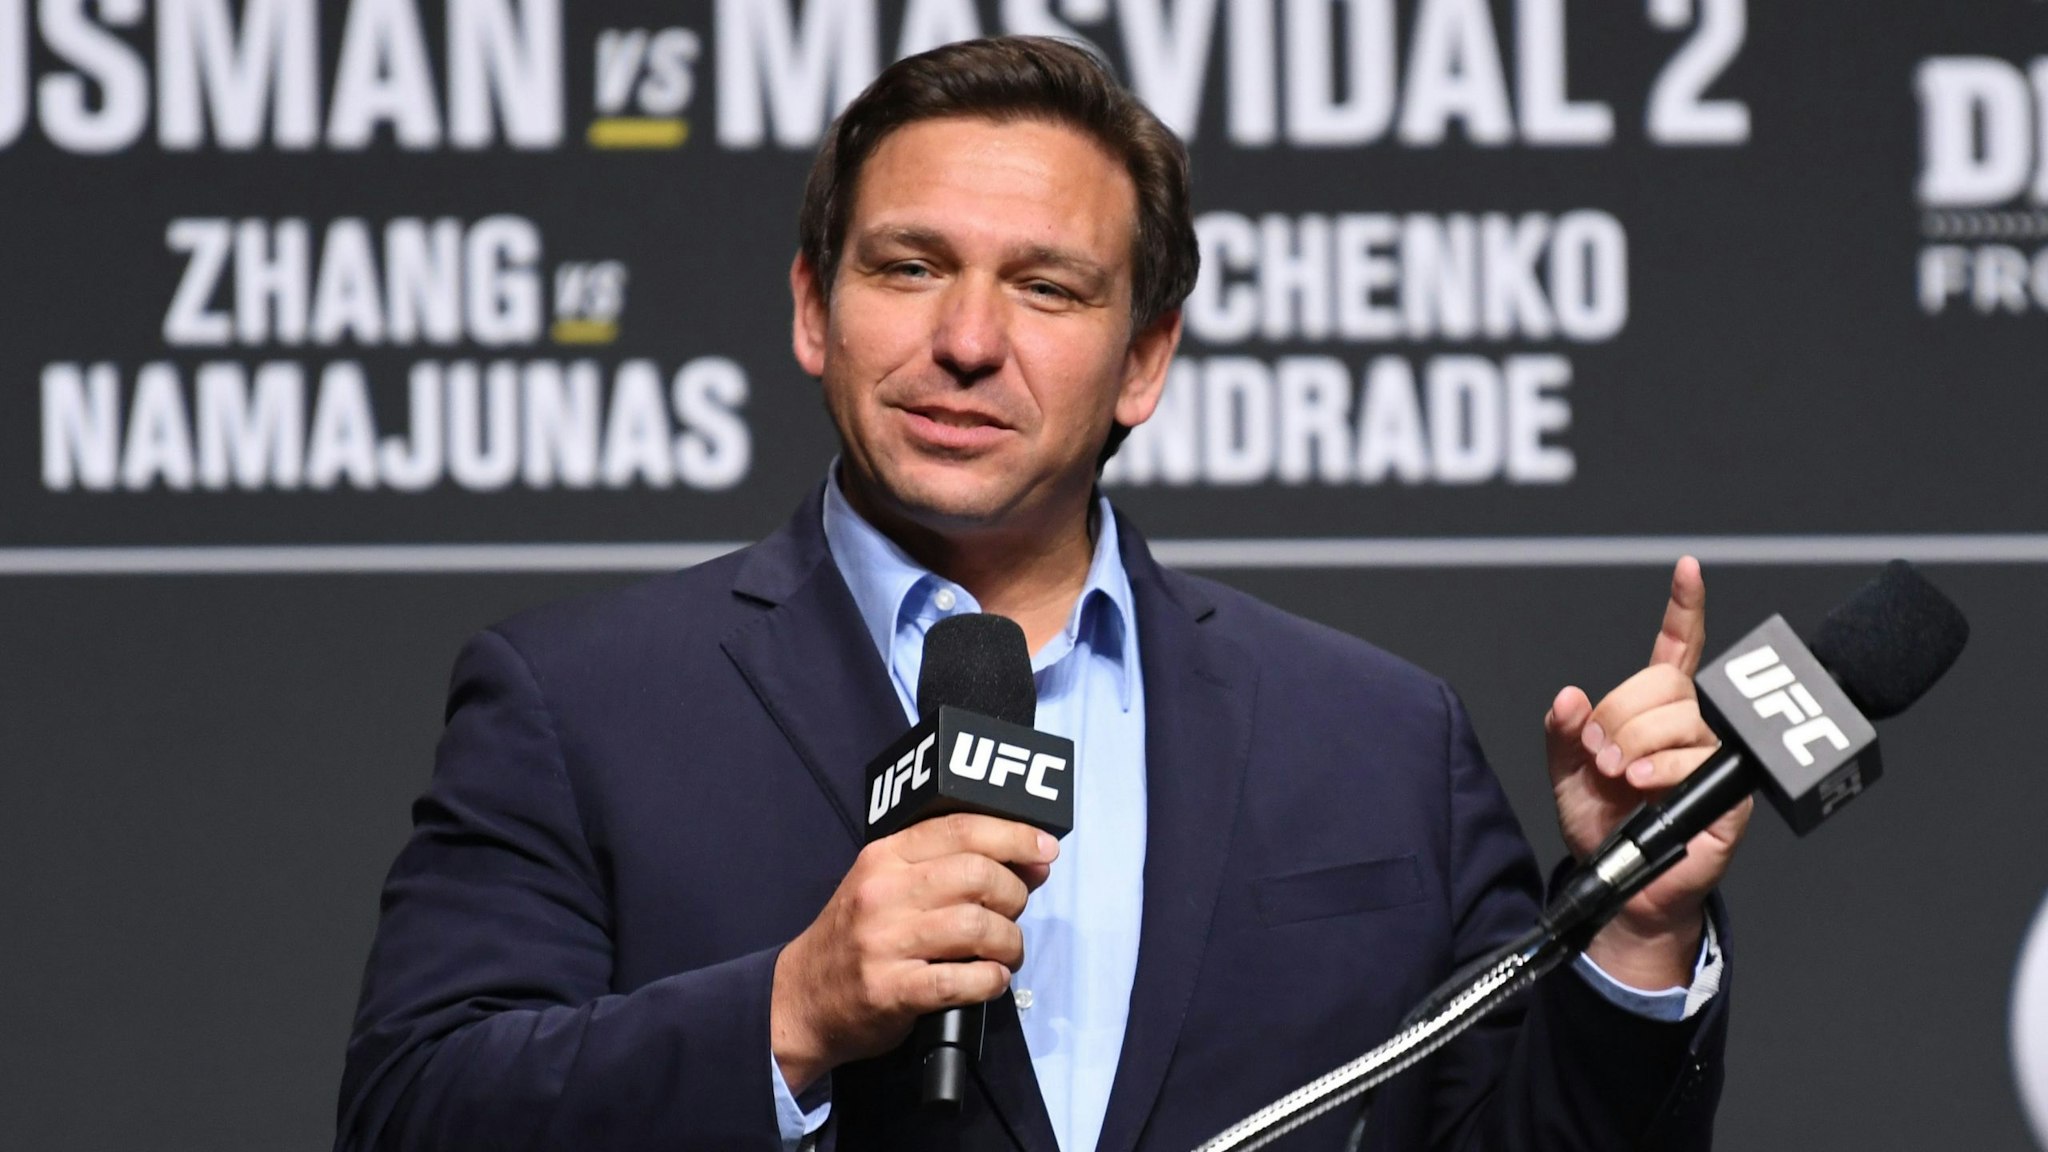 JACKSONVILLE, FLORIDA - APRIL 22: Florida Gov. Ron DeSantis interacts with media during the UFC 261 press conference at VyStar Veterans Memorial Arena on April 22, 2021 in Jacksonville, Florida.